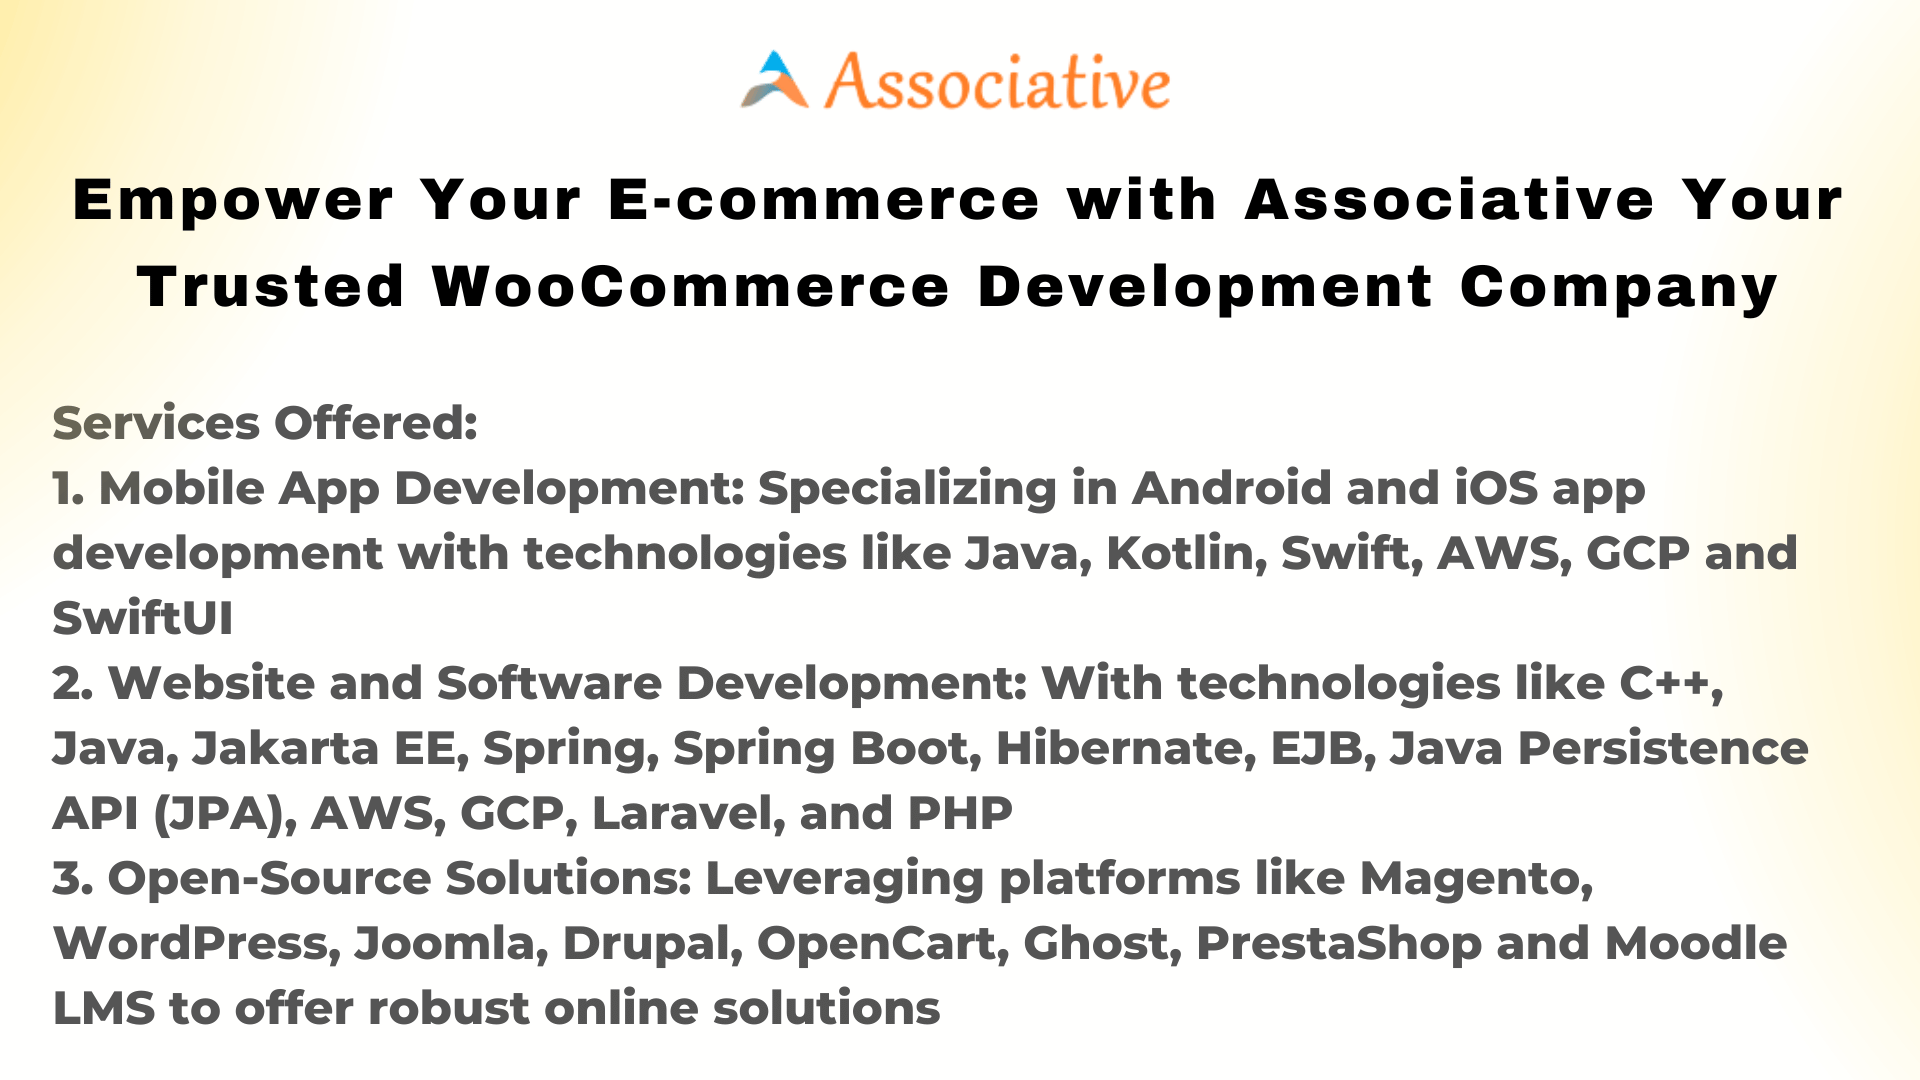 Empower Your E-commerce with Associative Your Trusted WooCommerce Development Company